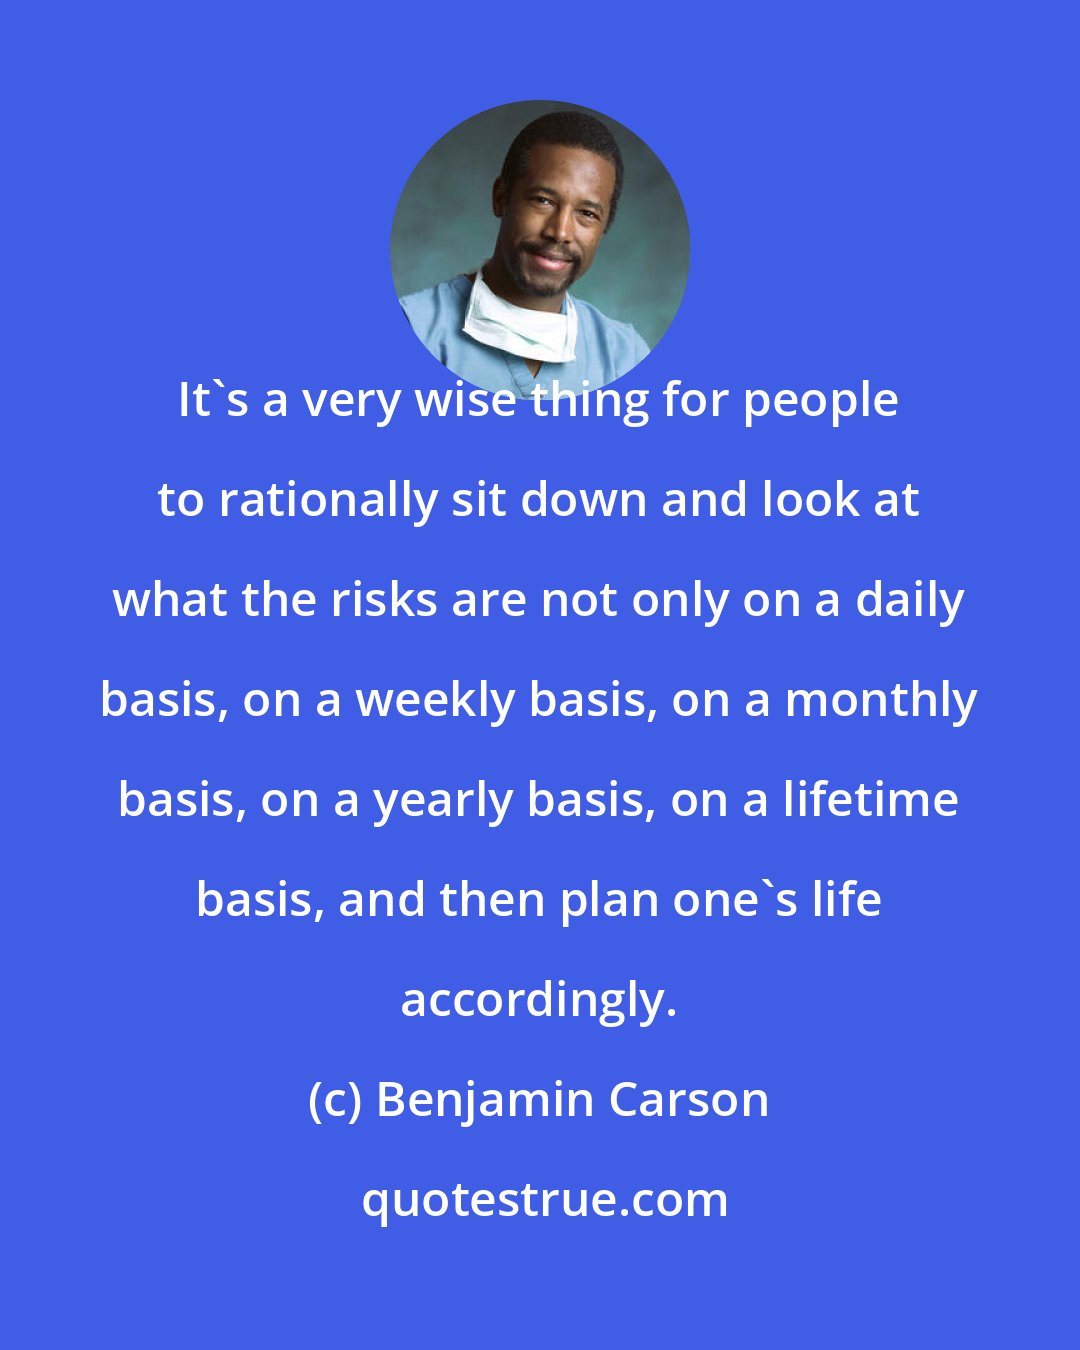 Benjamin Carson: It's a very wise thing for people to rationally sit down and look at what the risks are not only on a daily basis, on a weekly basis, on a monthly basis, on a yearly basis, on a lifetime basis, and then plan one's life accordingly.